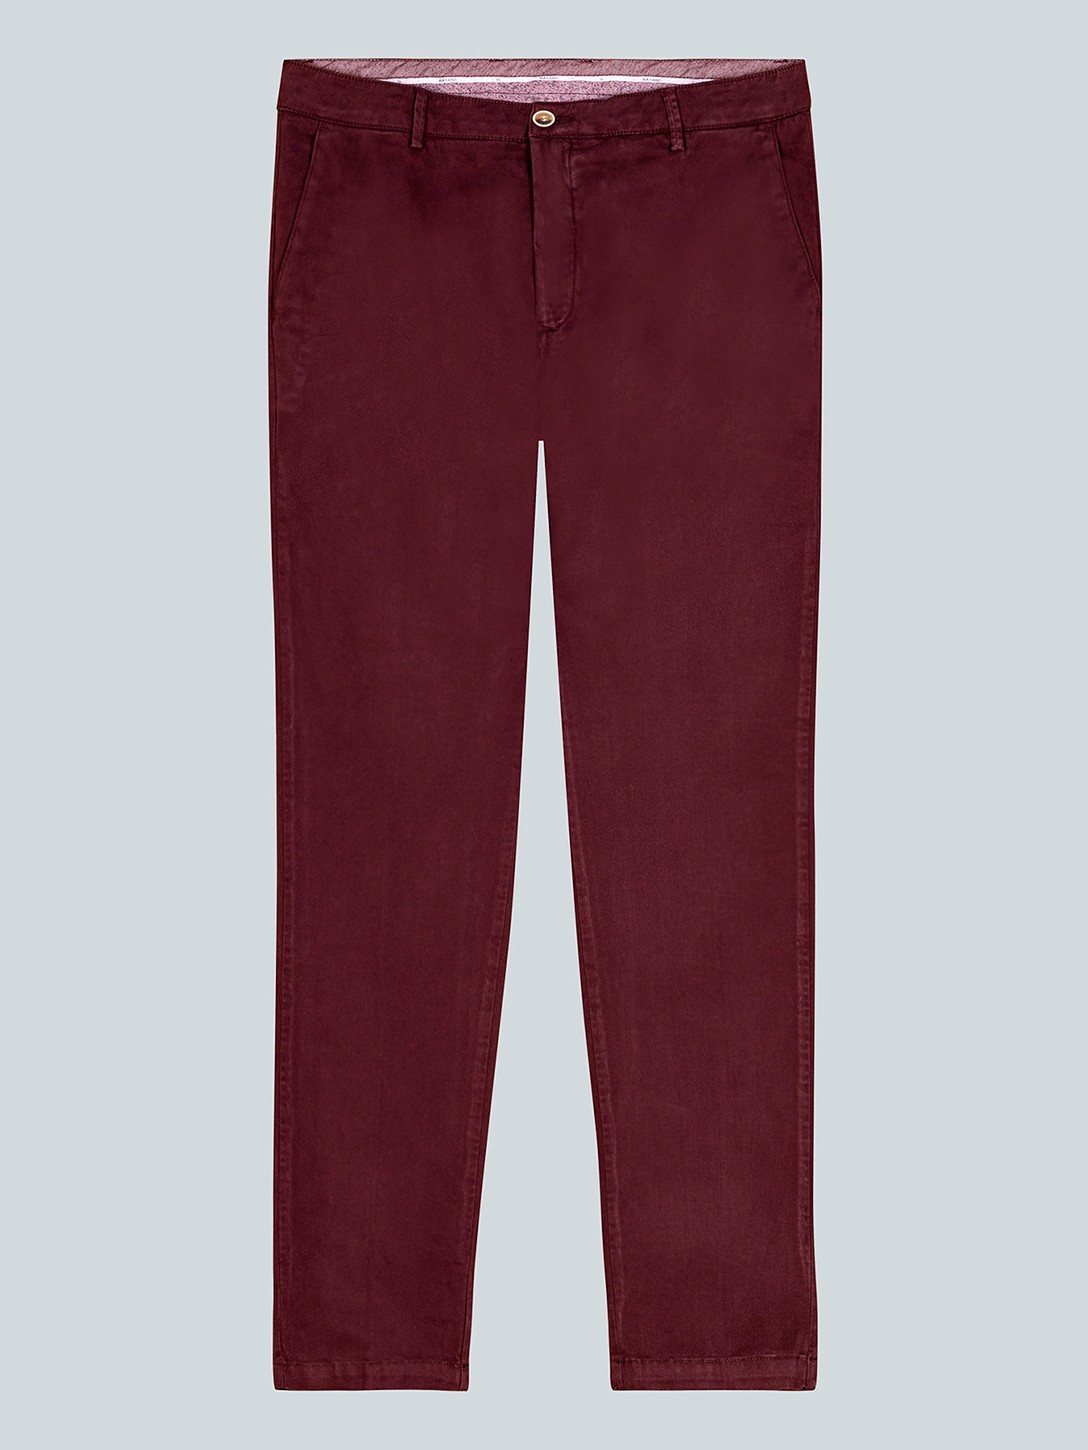 Chino bordeaux Charly